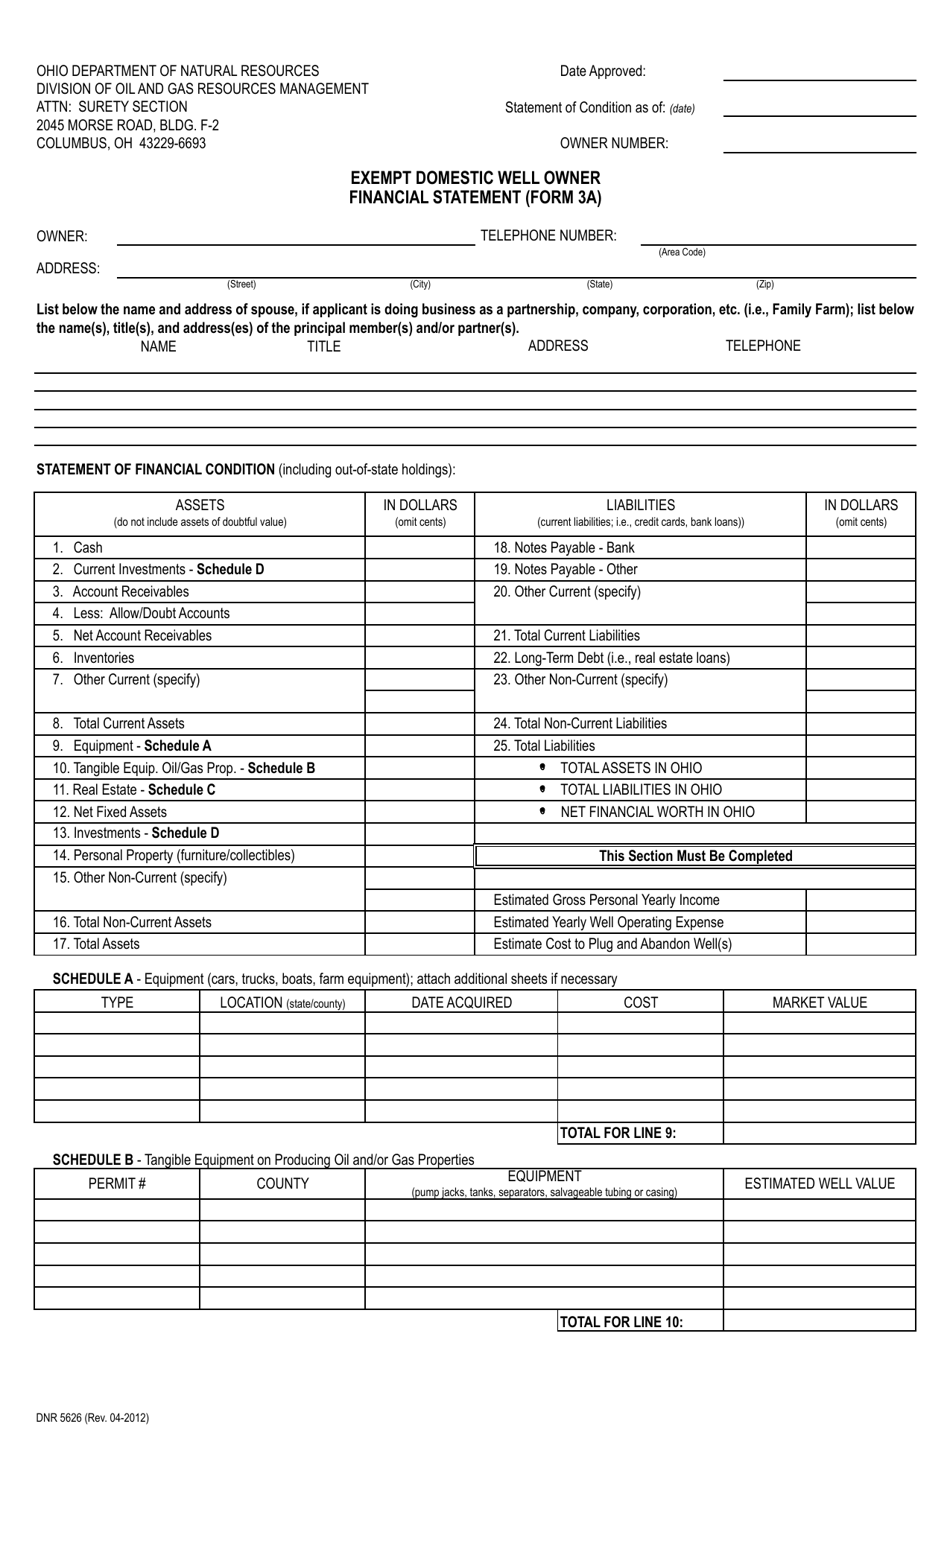 Form DNR5626 (3A) Exempt Domestic Well Owner Financial Statement - Ohio, Page 1